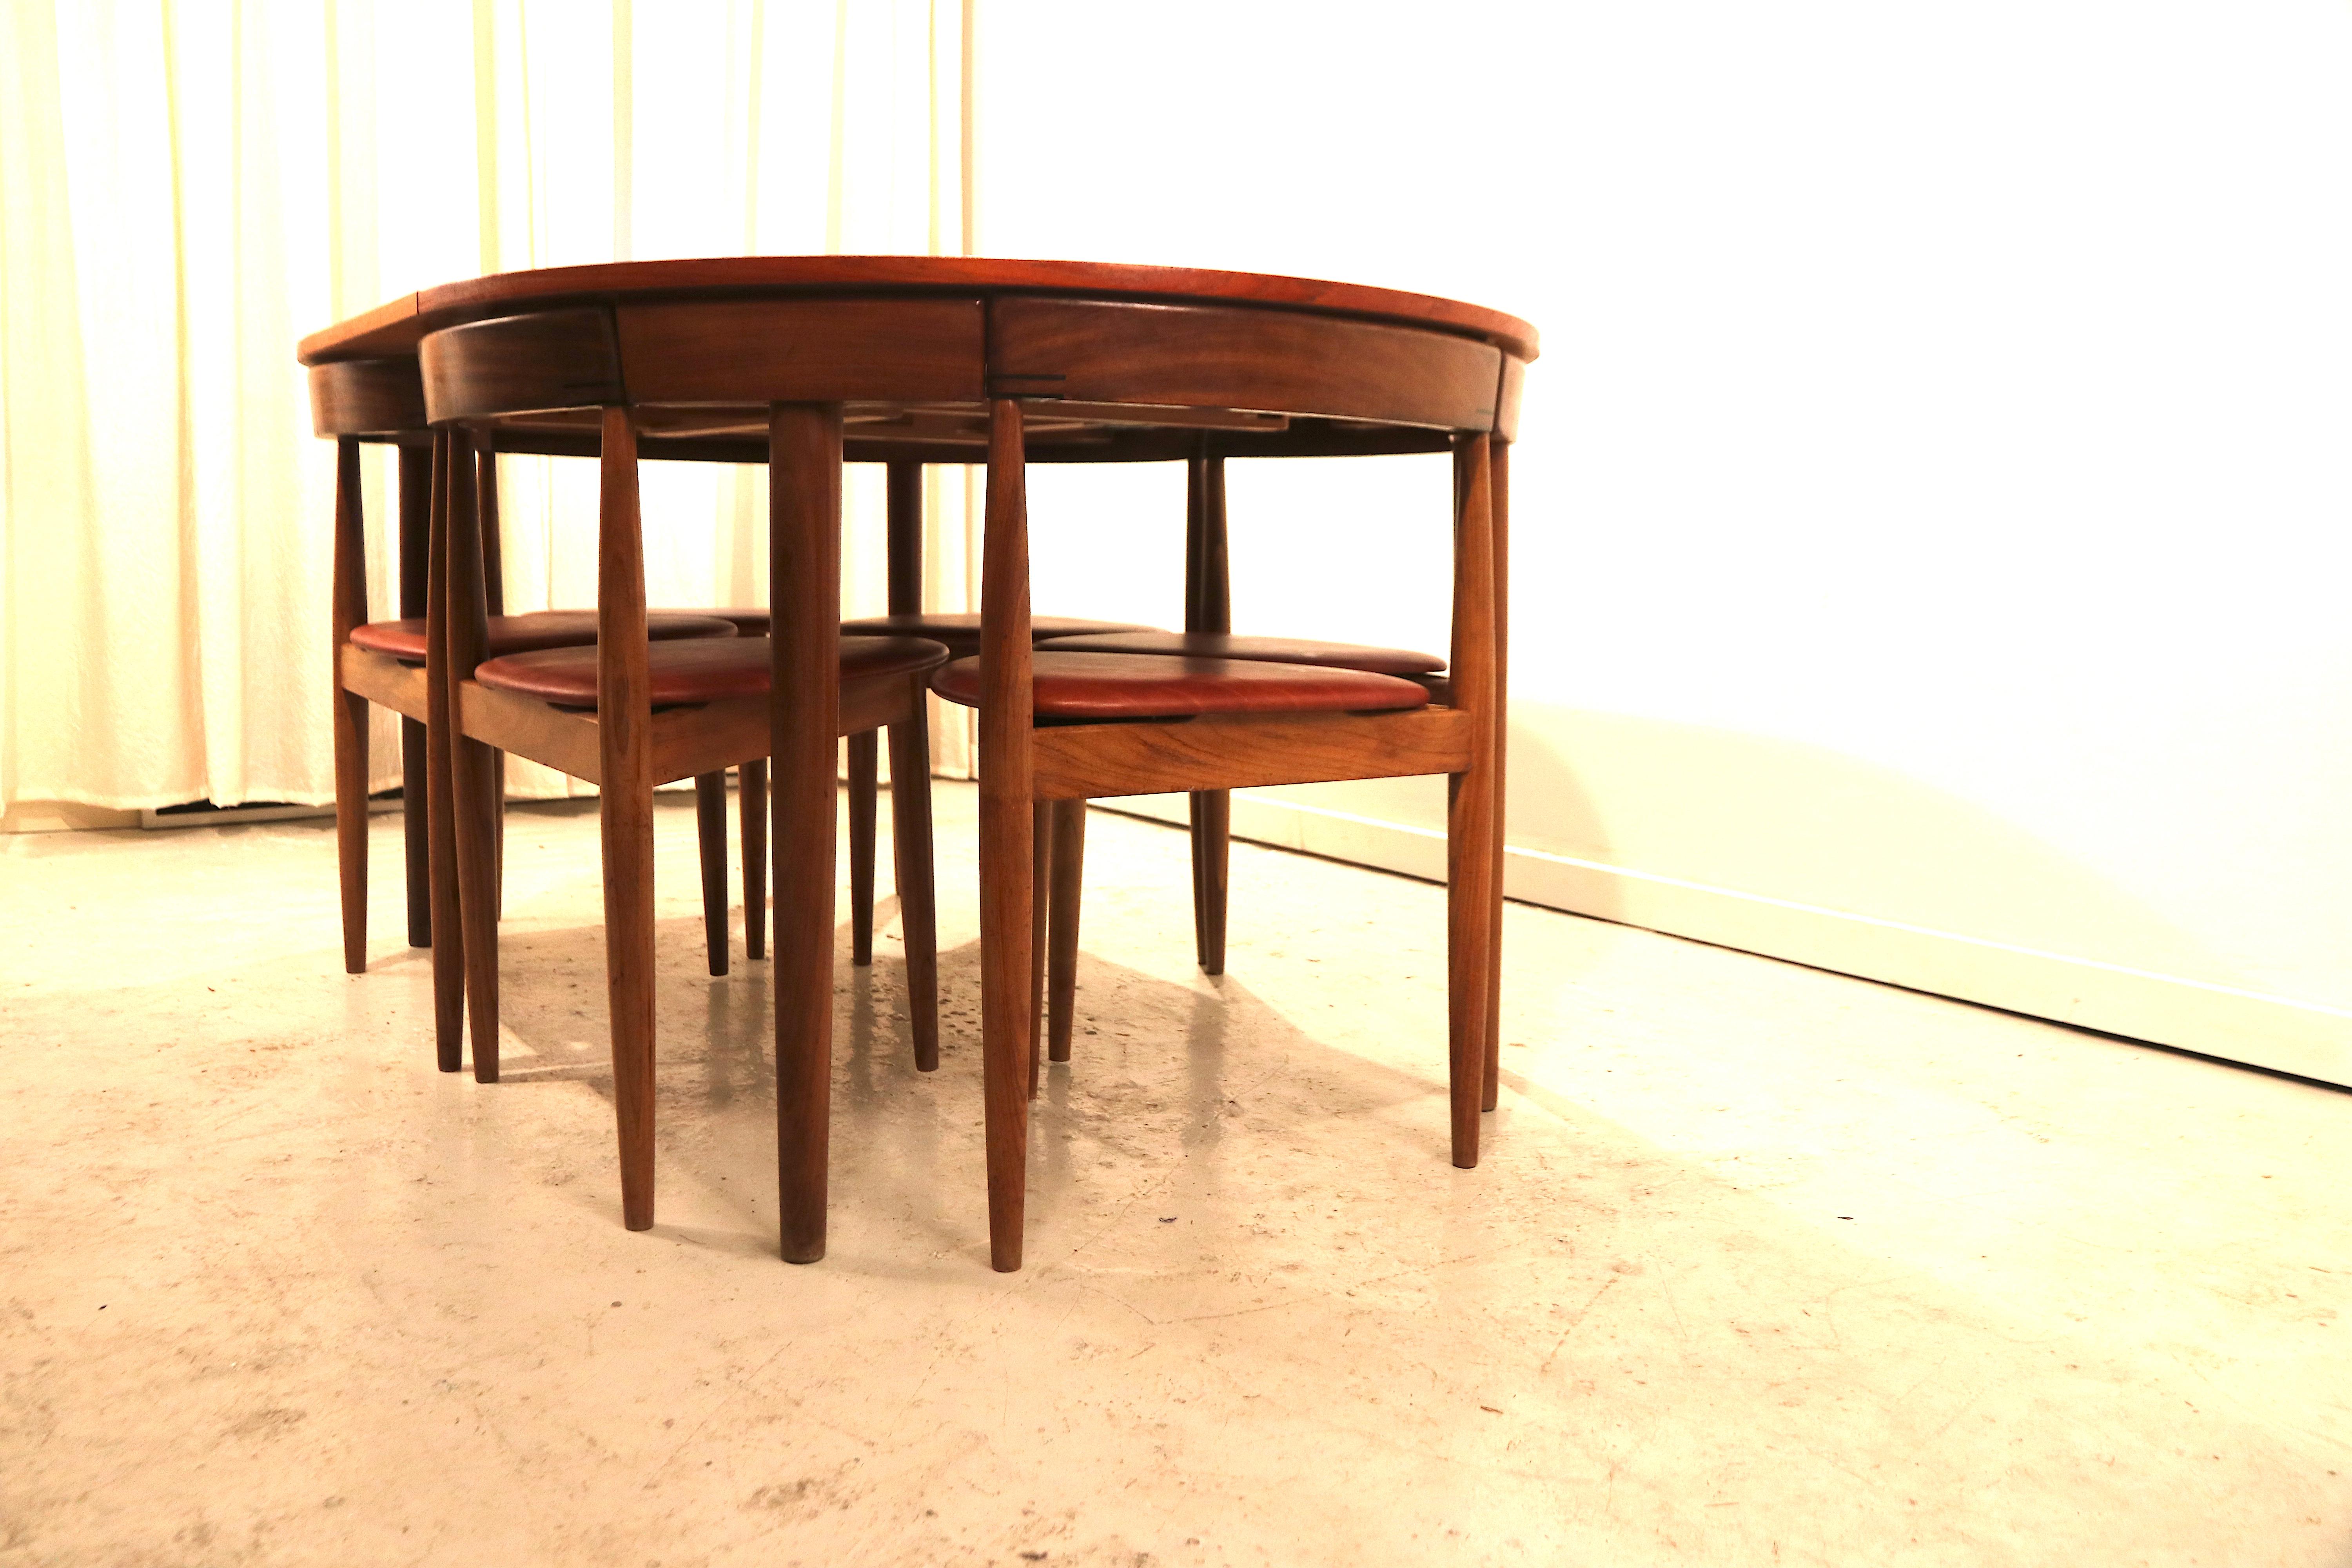 Beautiful example of Danish Mid-Century Modern design. Rare set of 6 (instead of 4) dining chairs and dining table, designed by Hans Olsen for Frem Rojle. In Denmark 1950s, in absolutely excellent condition. The built-in butterfly leaf dining table